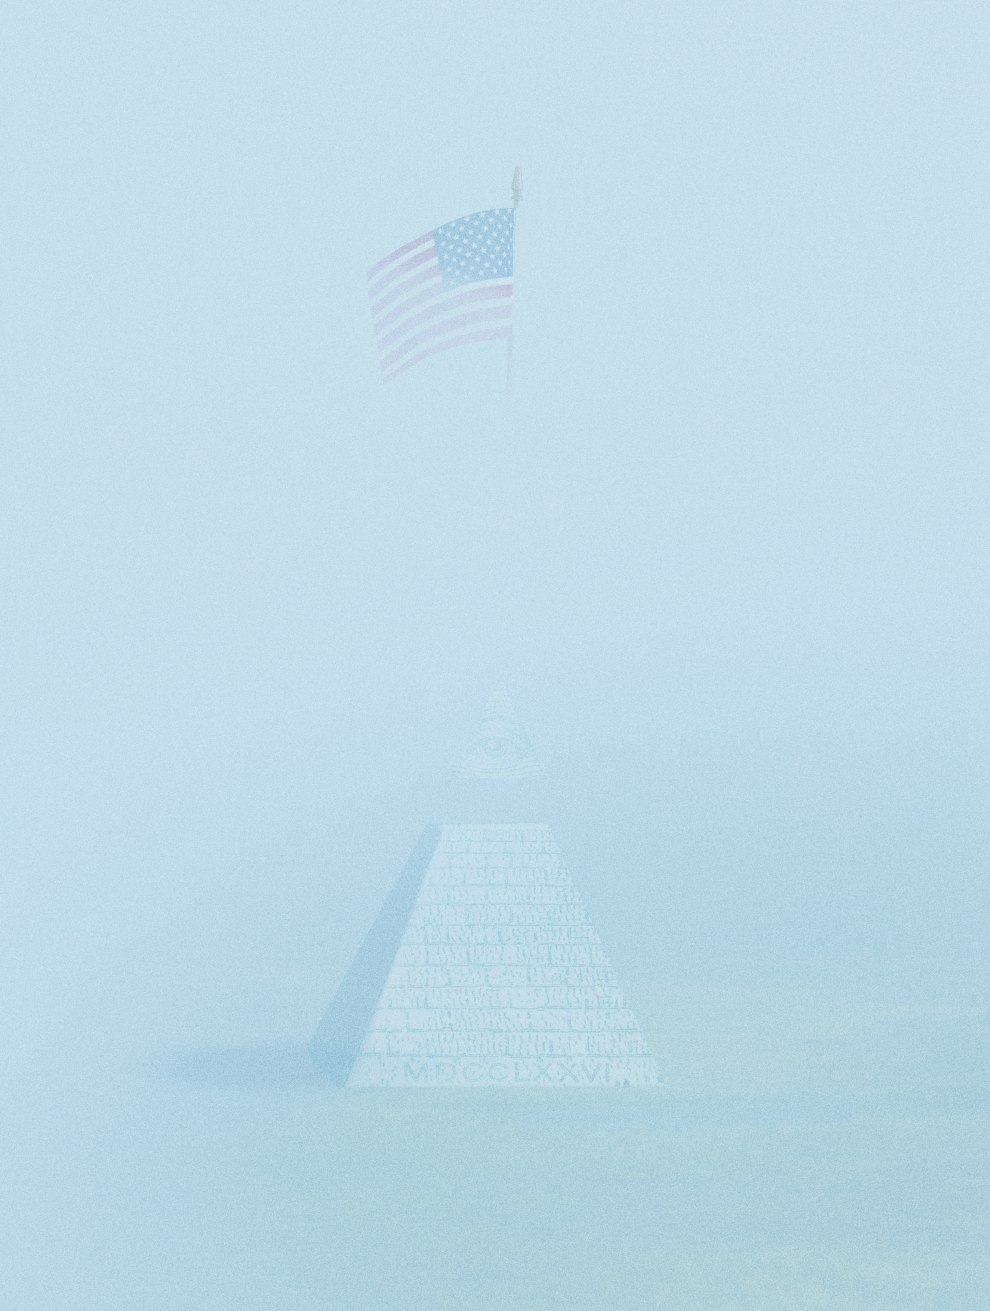 An American flag waves in an opaque, foggy light blue background.